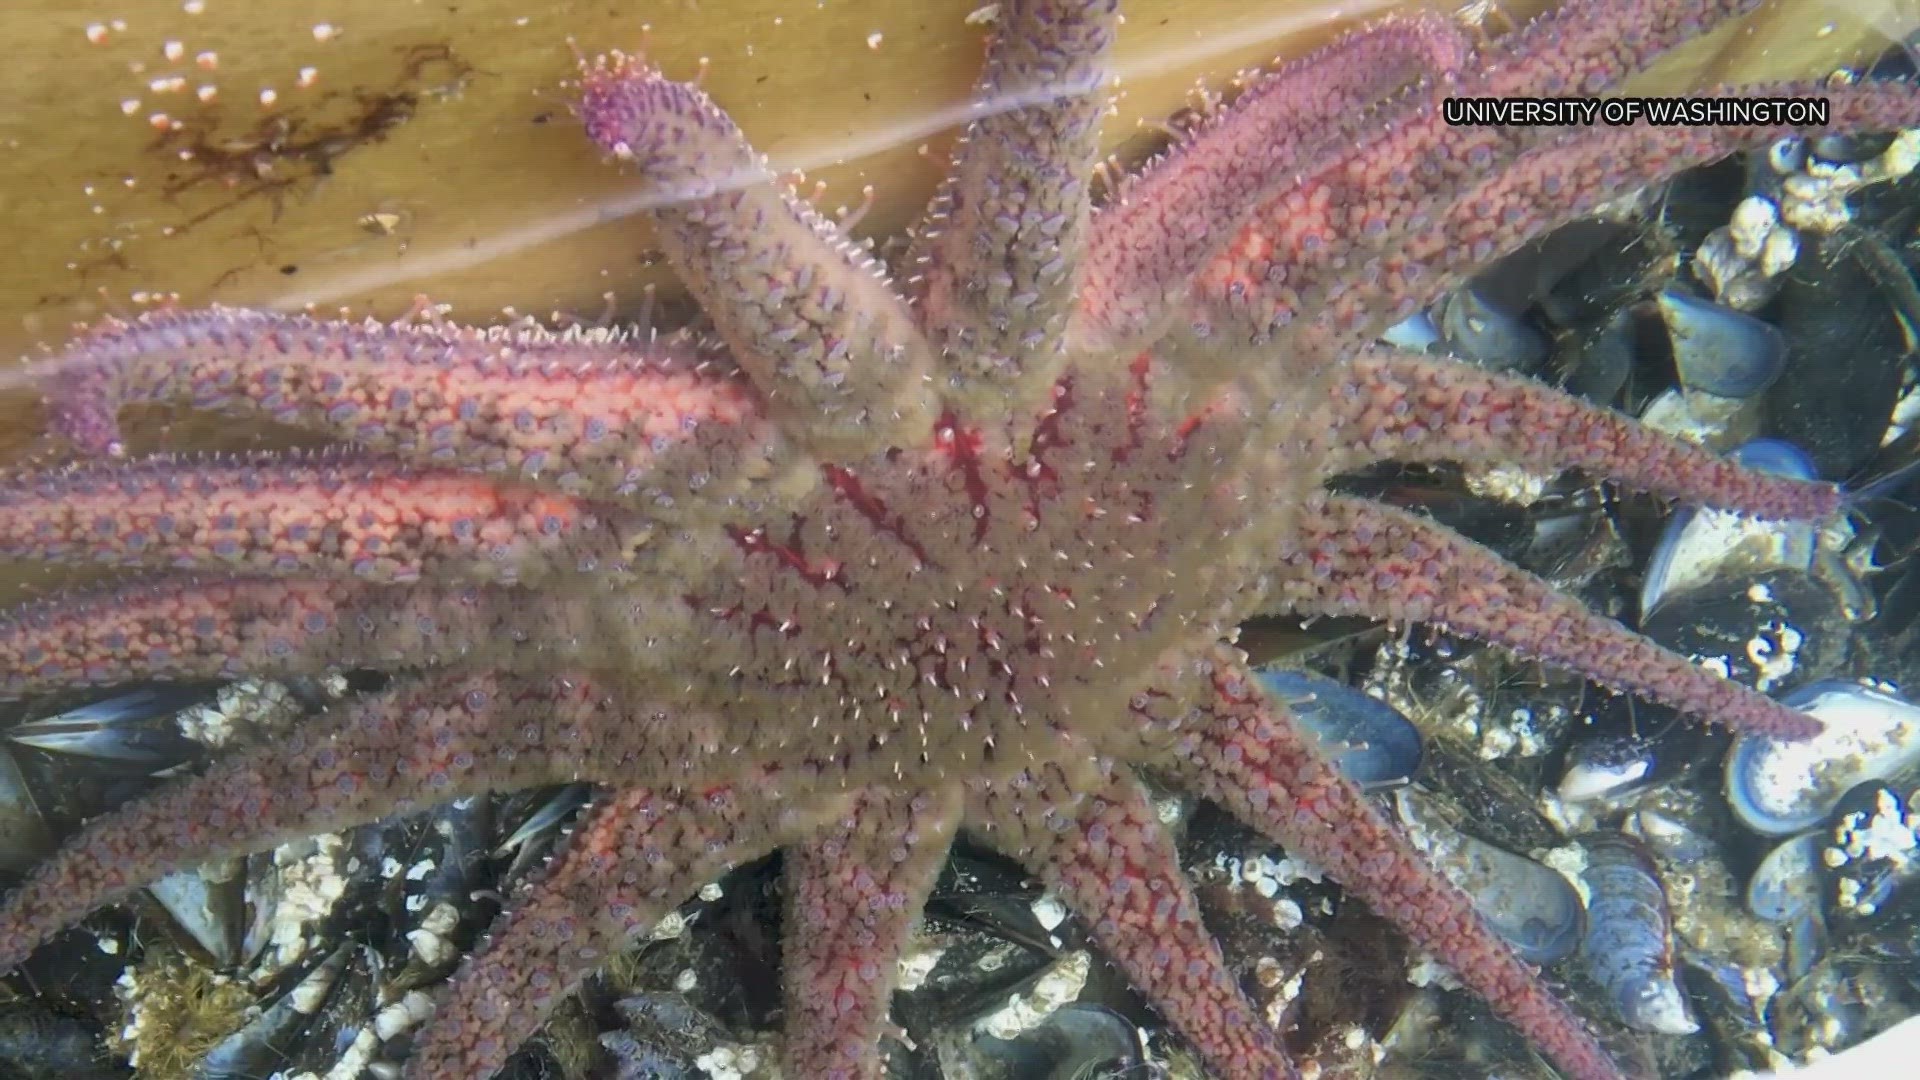 The marine life native to Washington's coast have been ravaged by "Sea Star Wasting Syndrome," which causes the creatures to disintegrate within days.